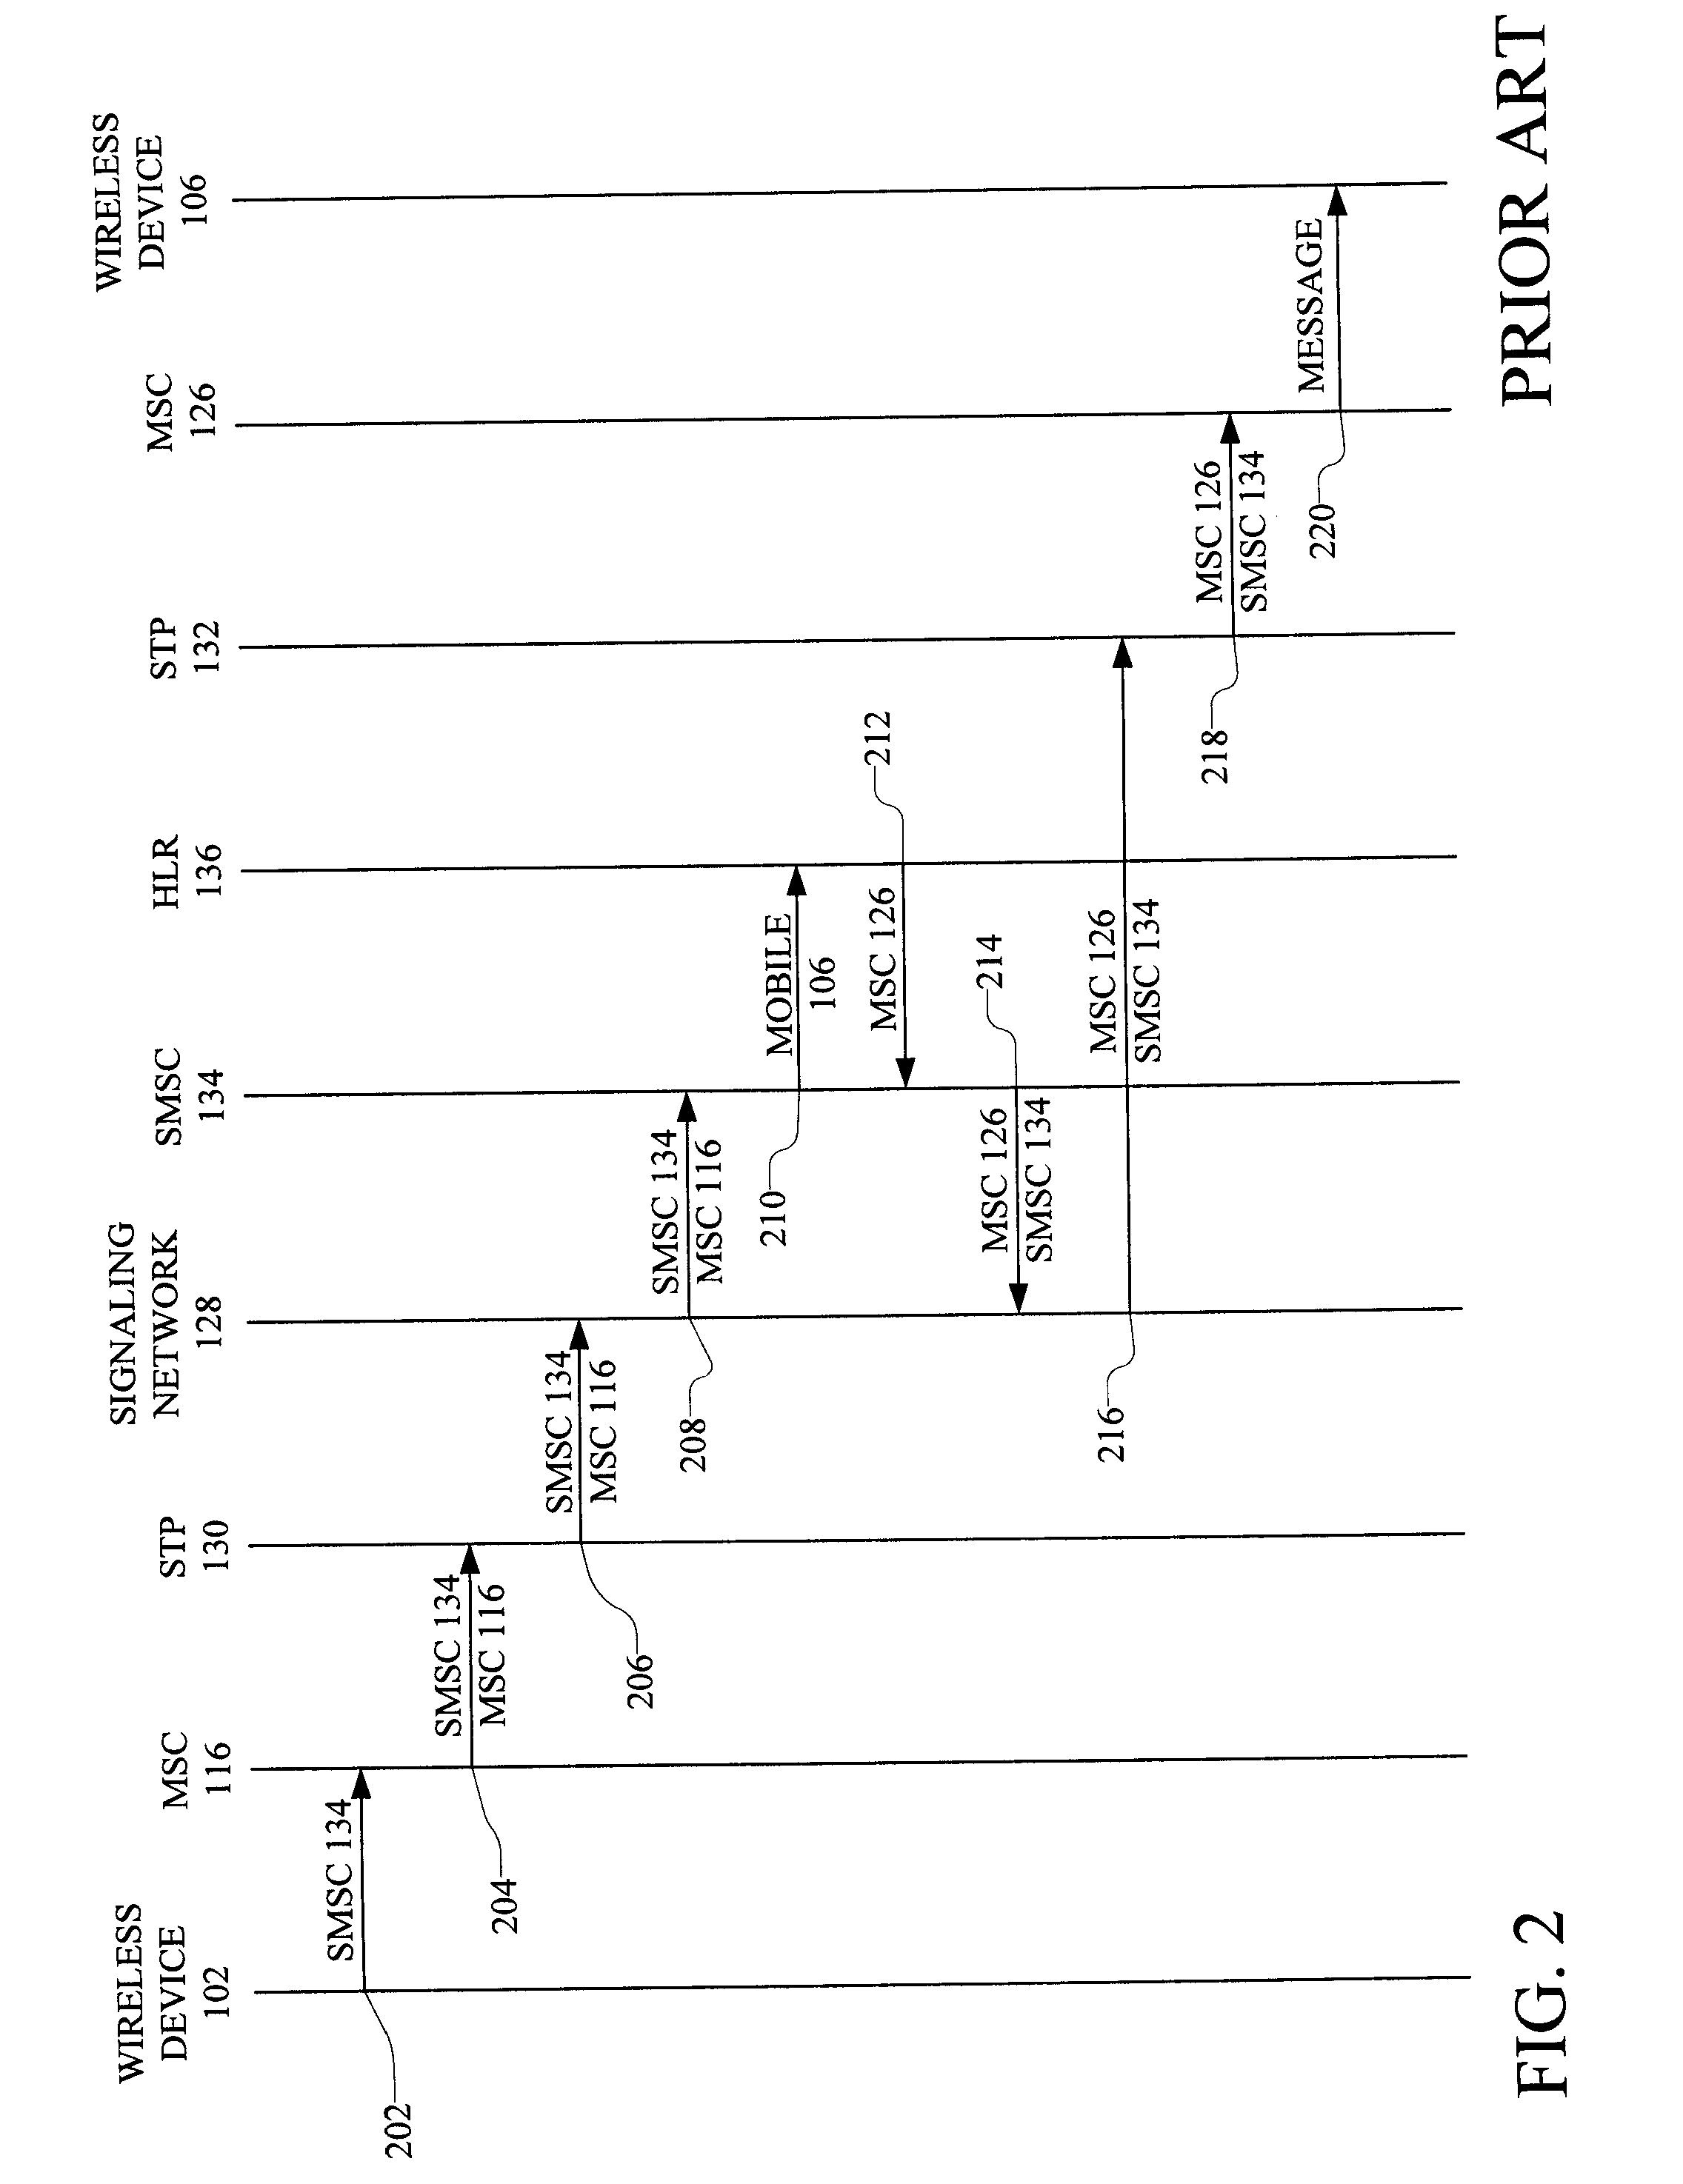 System and Method for Routing Short Message Service Special Number Messages to Local Special Number Answering Points